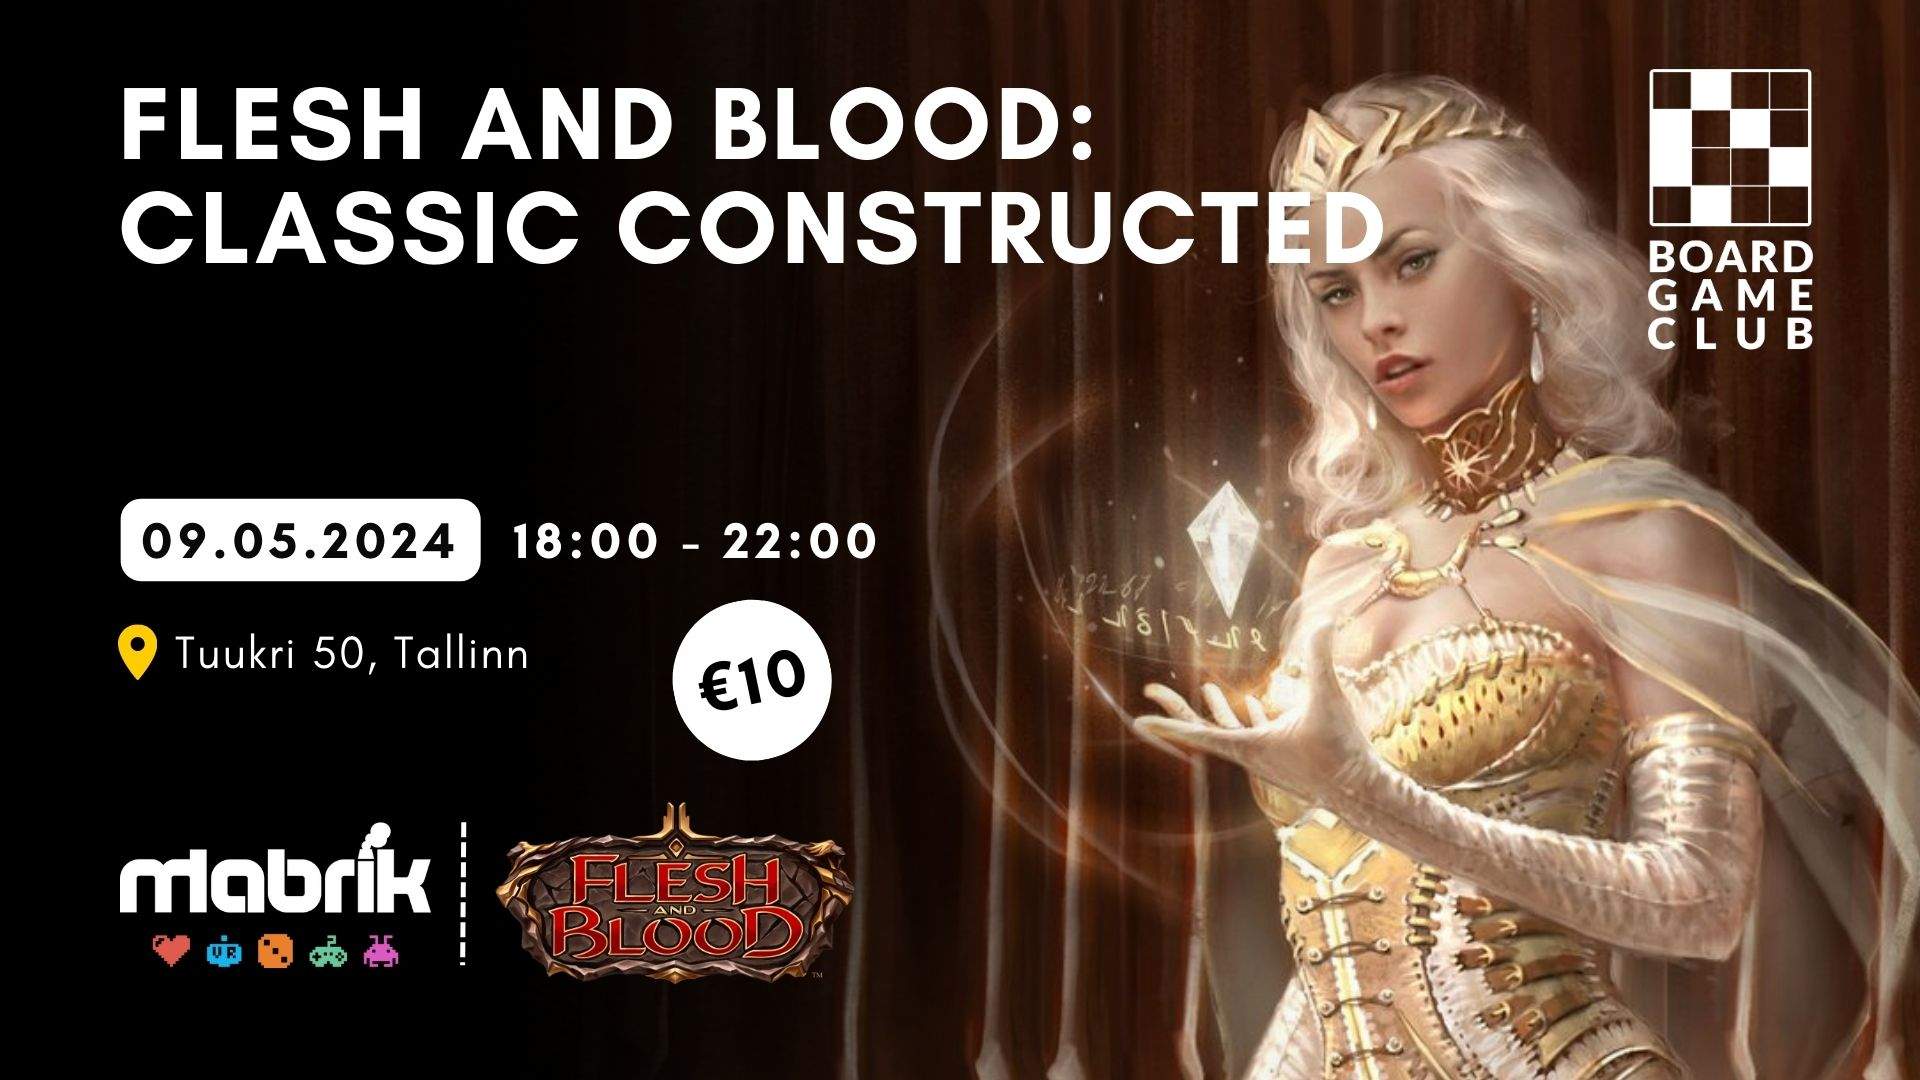 Events - 11.04.2024 - Flesh & Blood - Classic Constructed